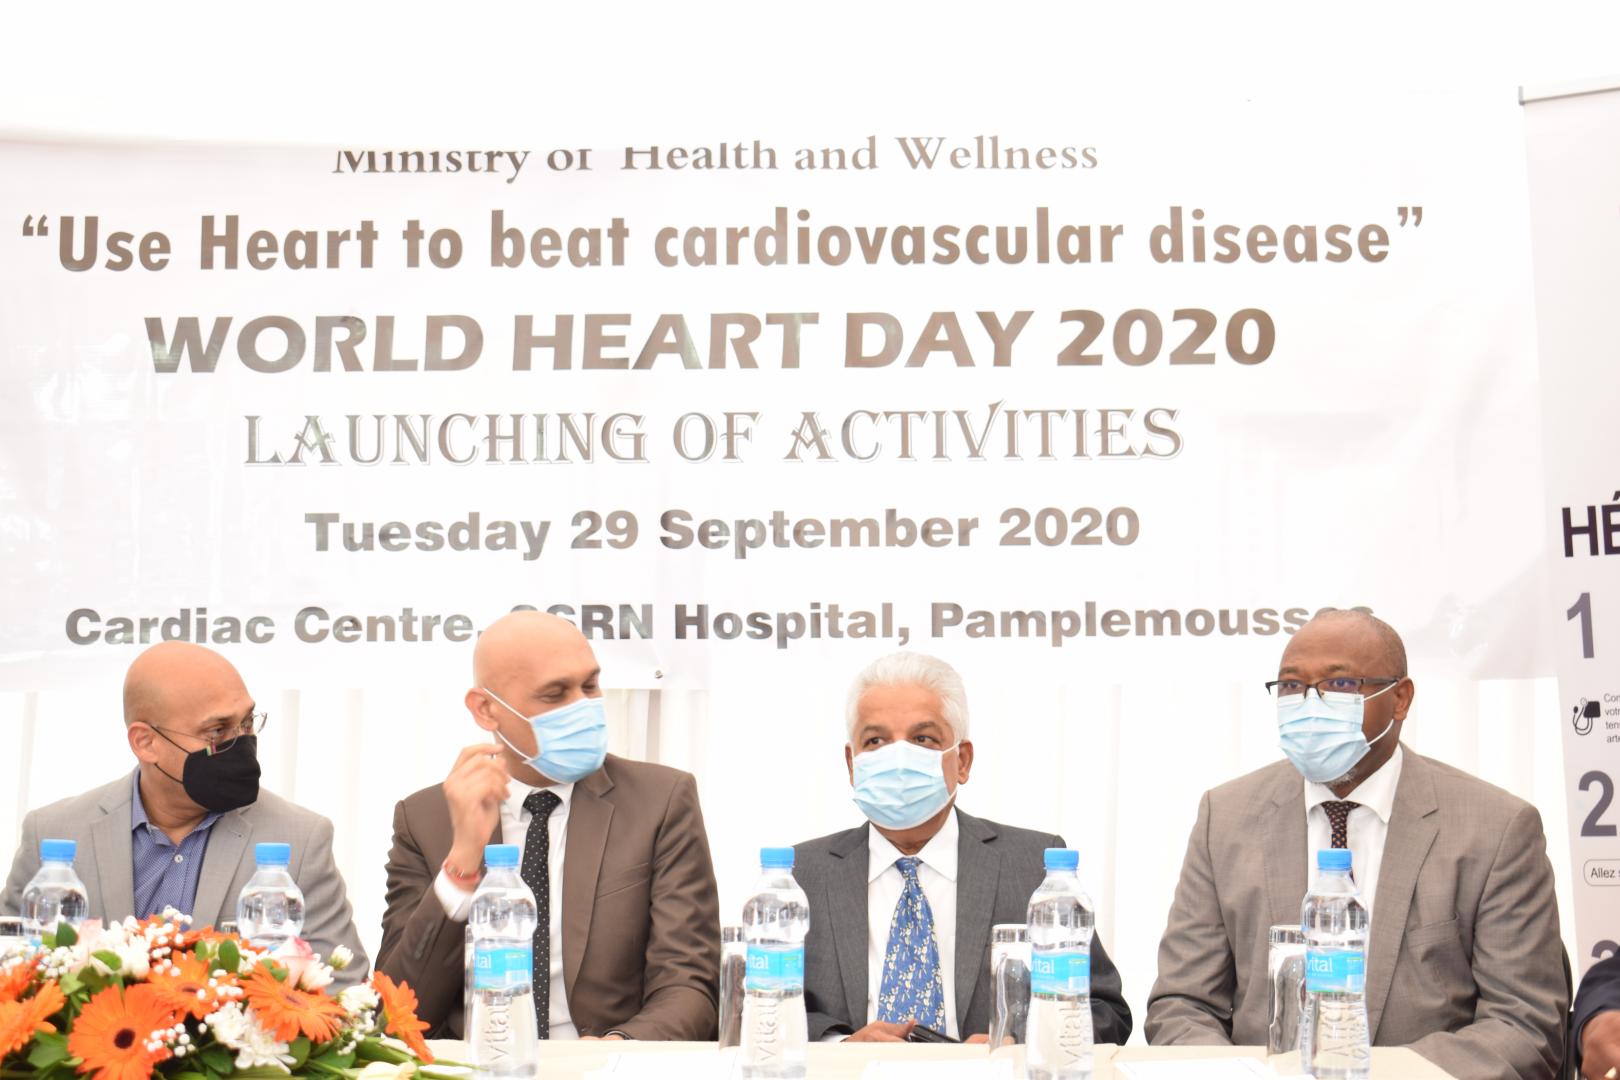 Frm left to rgt: Mr S.K. Kallichurn, Minister of Labour, Human Resource Development and Training, Dr K.K. Jagutpal, Minister of Health and Wellnes, Dr Sunil Gunness, Cardiologist and Head of the Cardiac Centre and Dr L. Musango, WHO Representative in Mauritius during the launching of activities to mark World Heart Day 2020 on 29 September 2020 at the Cardiac Centre, Pamplemousses